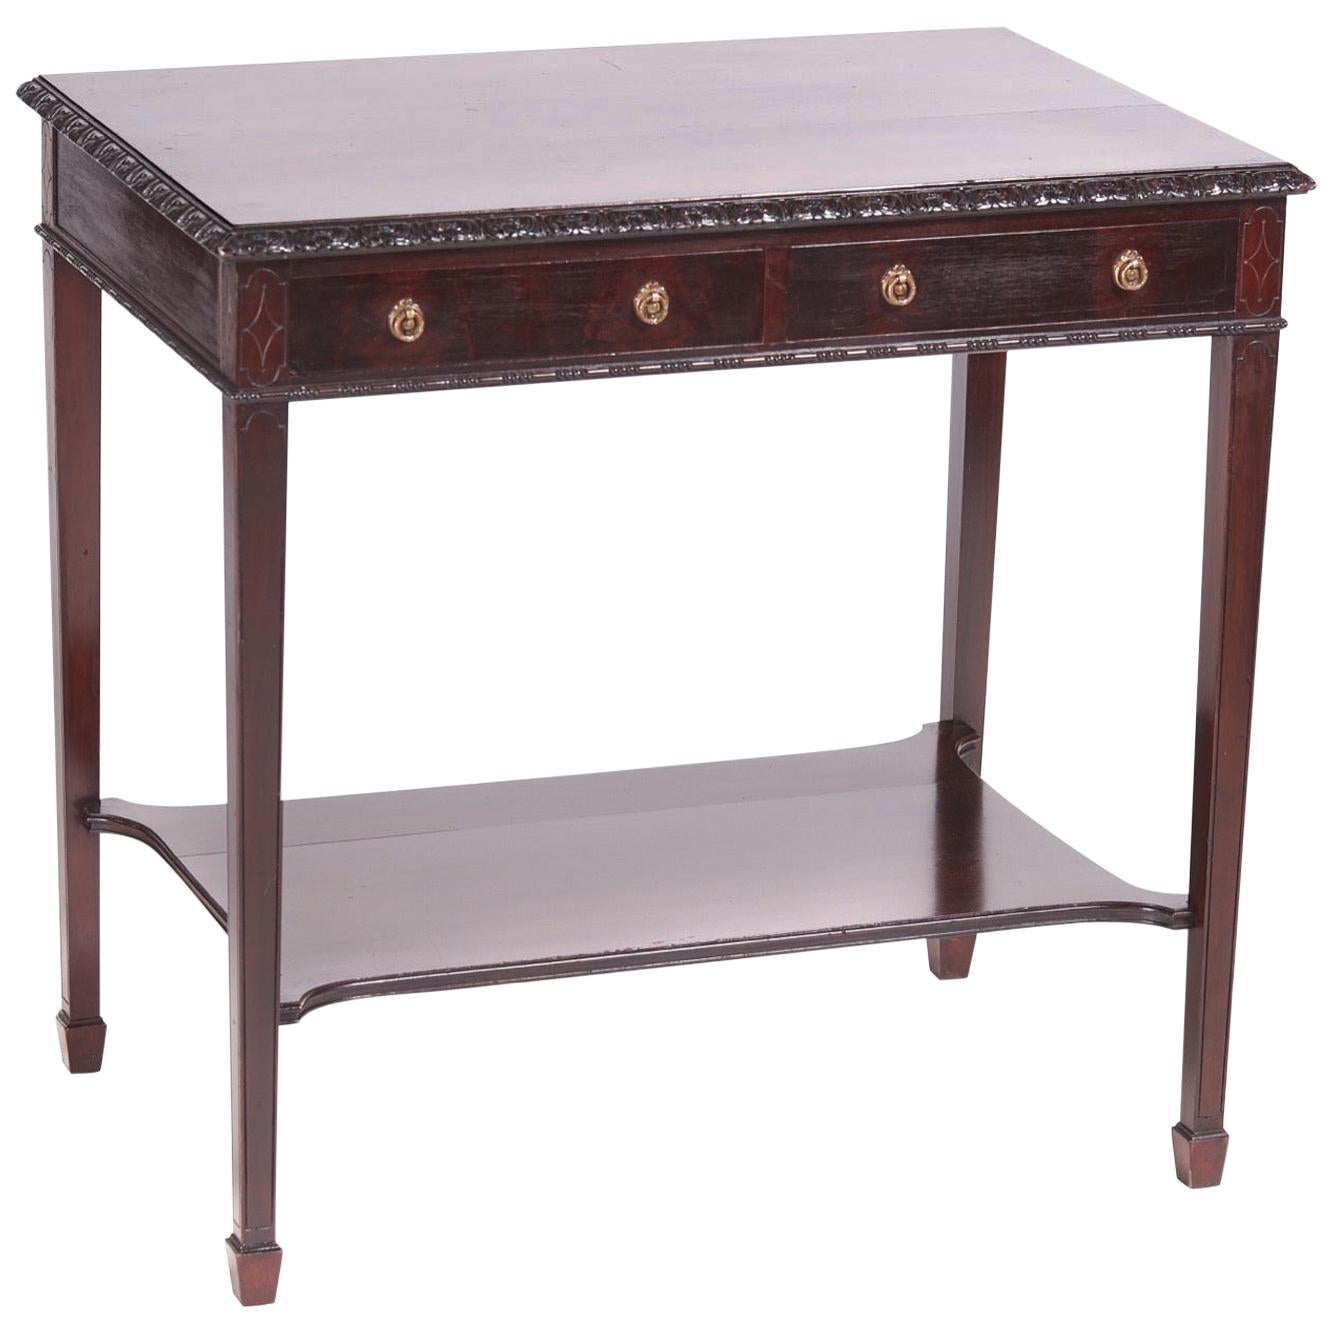 Quality Antique Edwardian Mahogany Freestanding Side Table For Sale